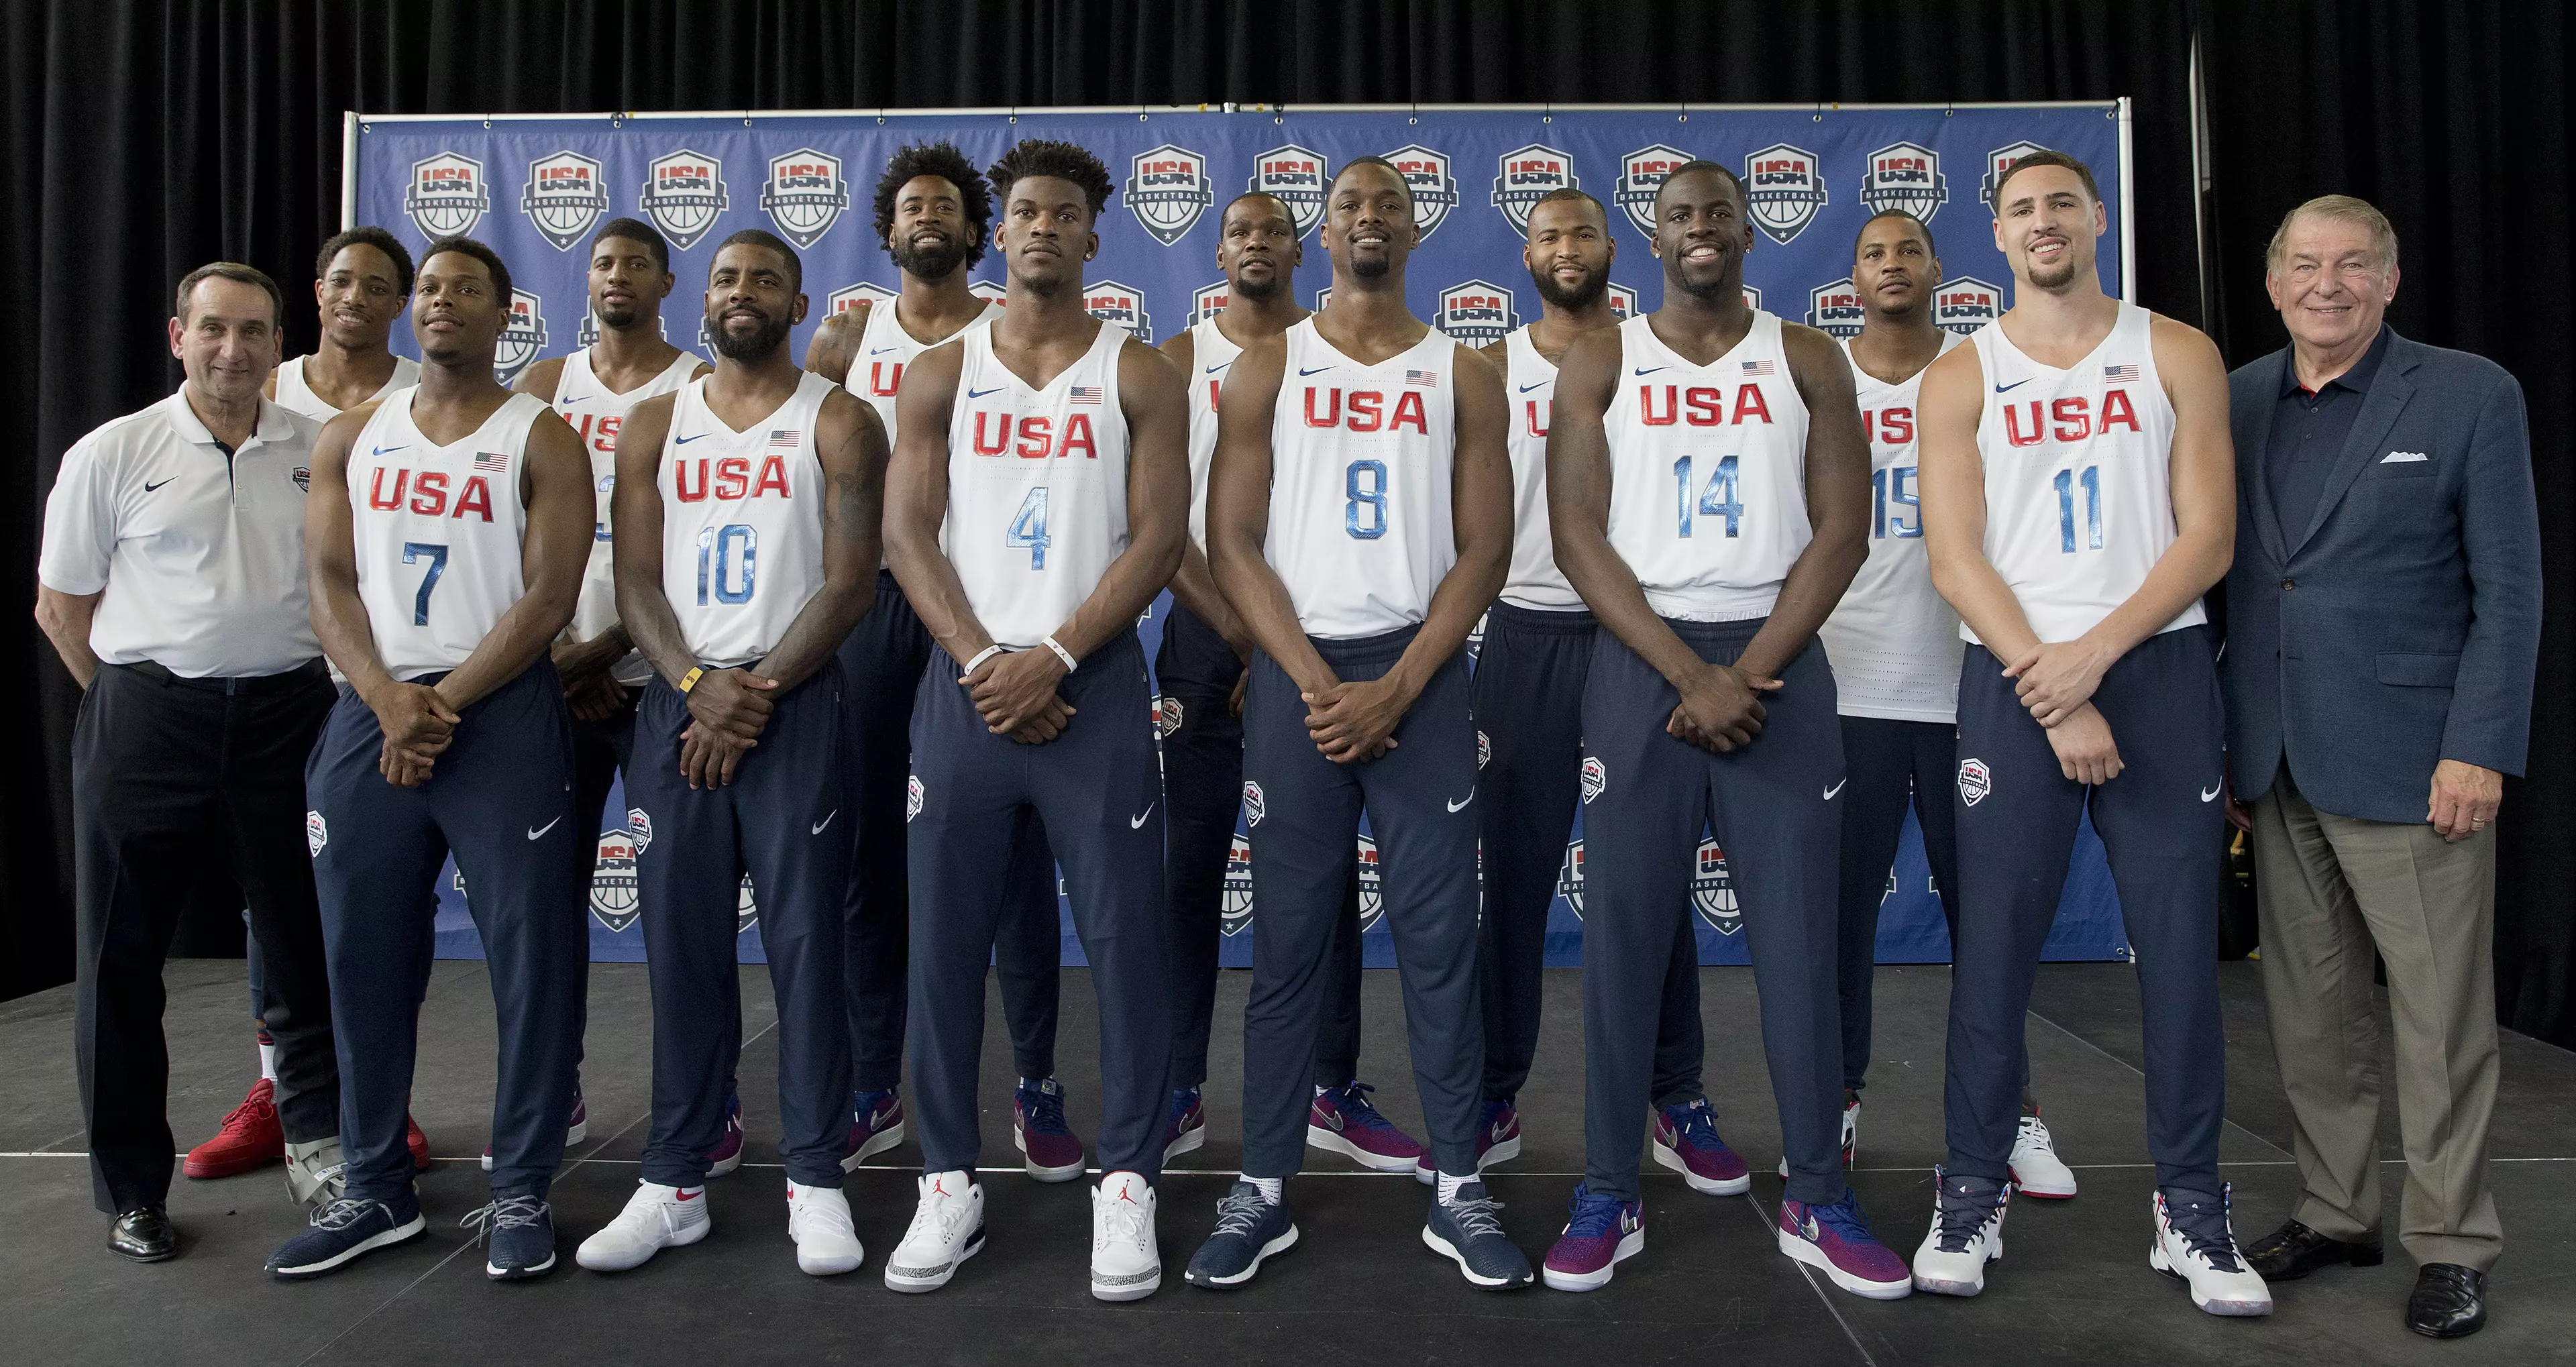 Check Out The USA Basketball Teams' Luxury Pad For The Rio Olympics!